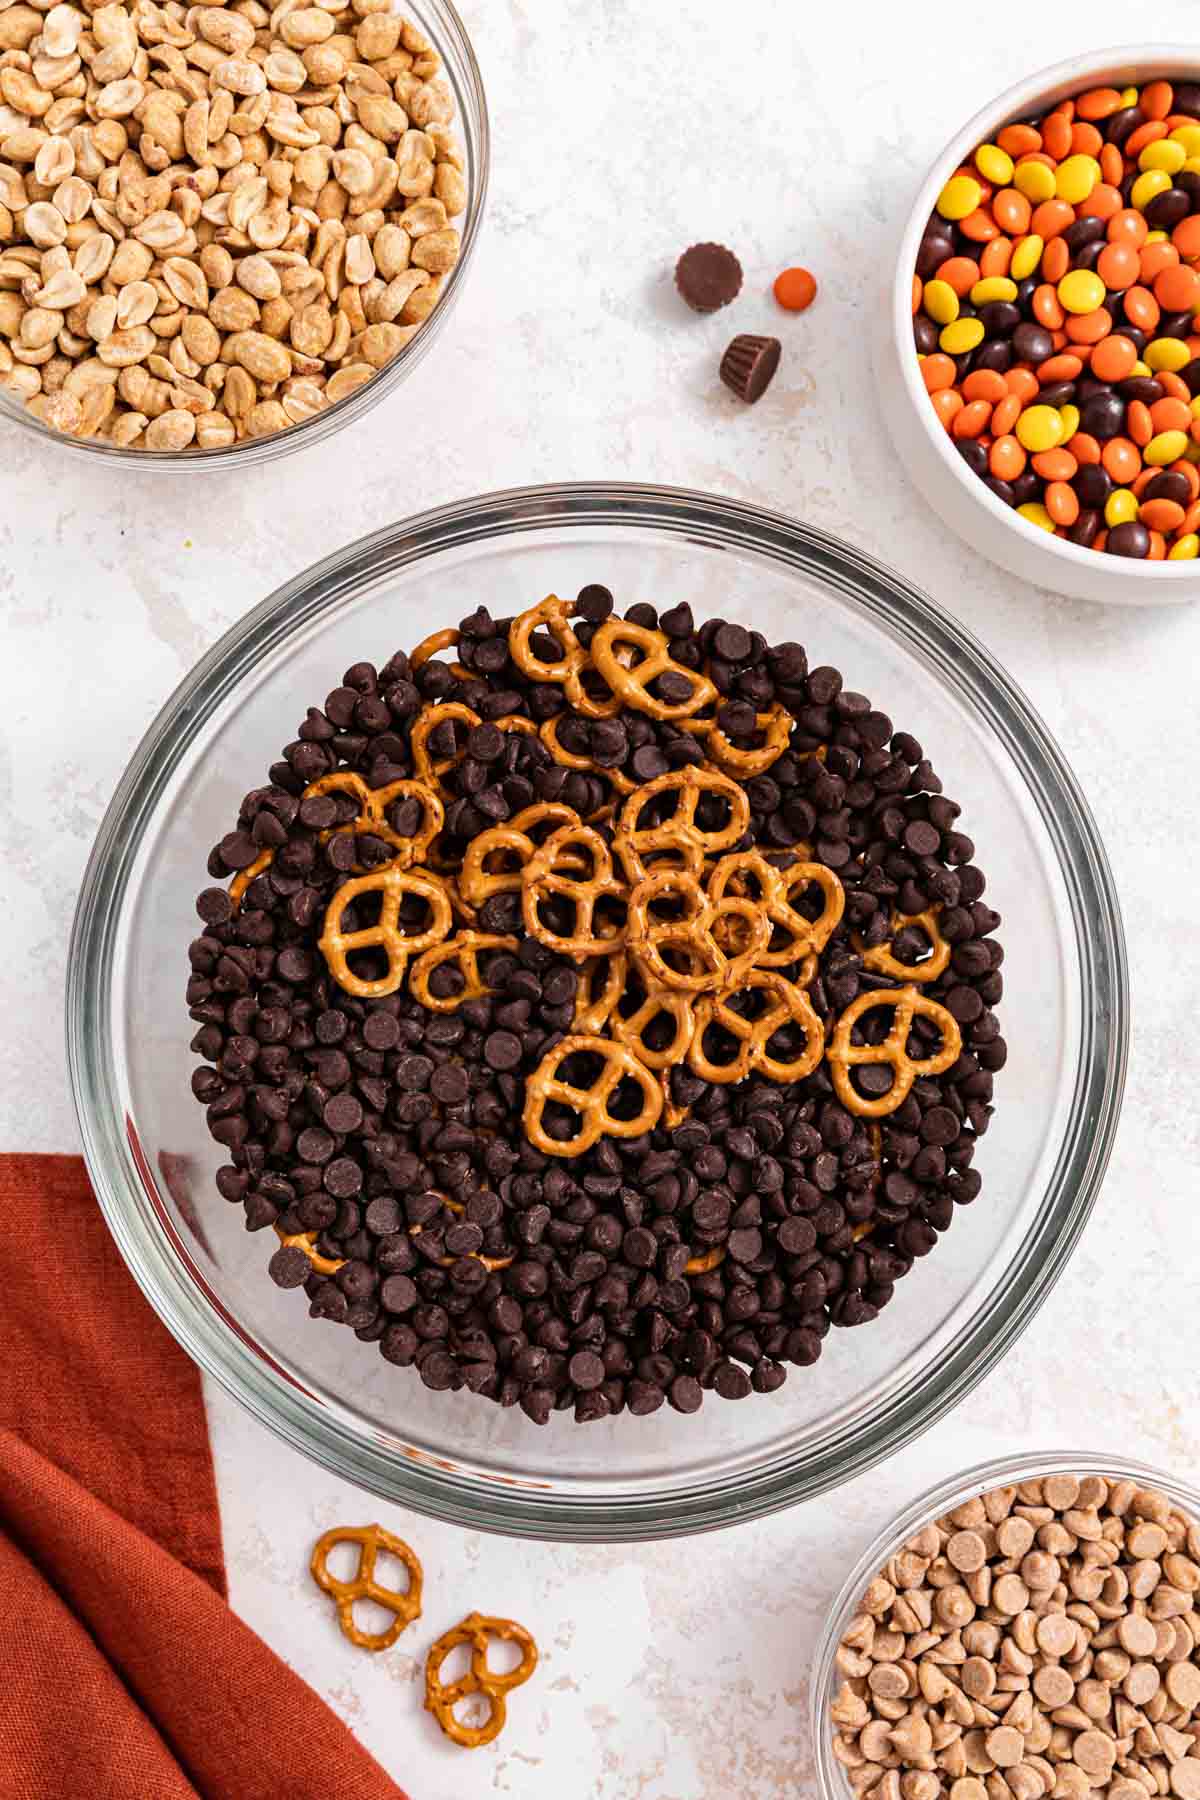 Chocolate Peanut Butter Trail Mix ingredients in large bowl before mixing